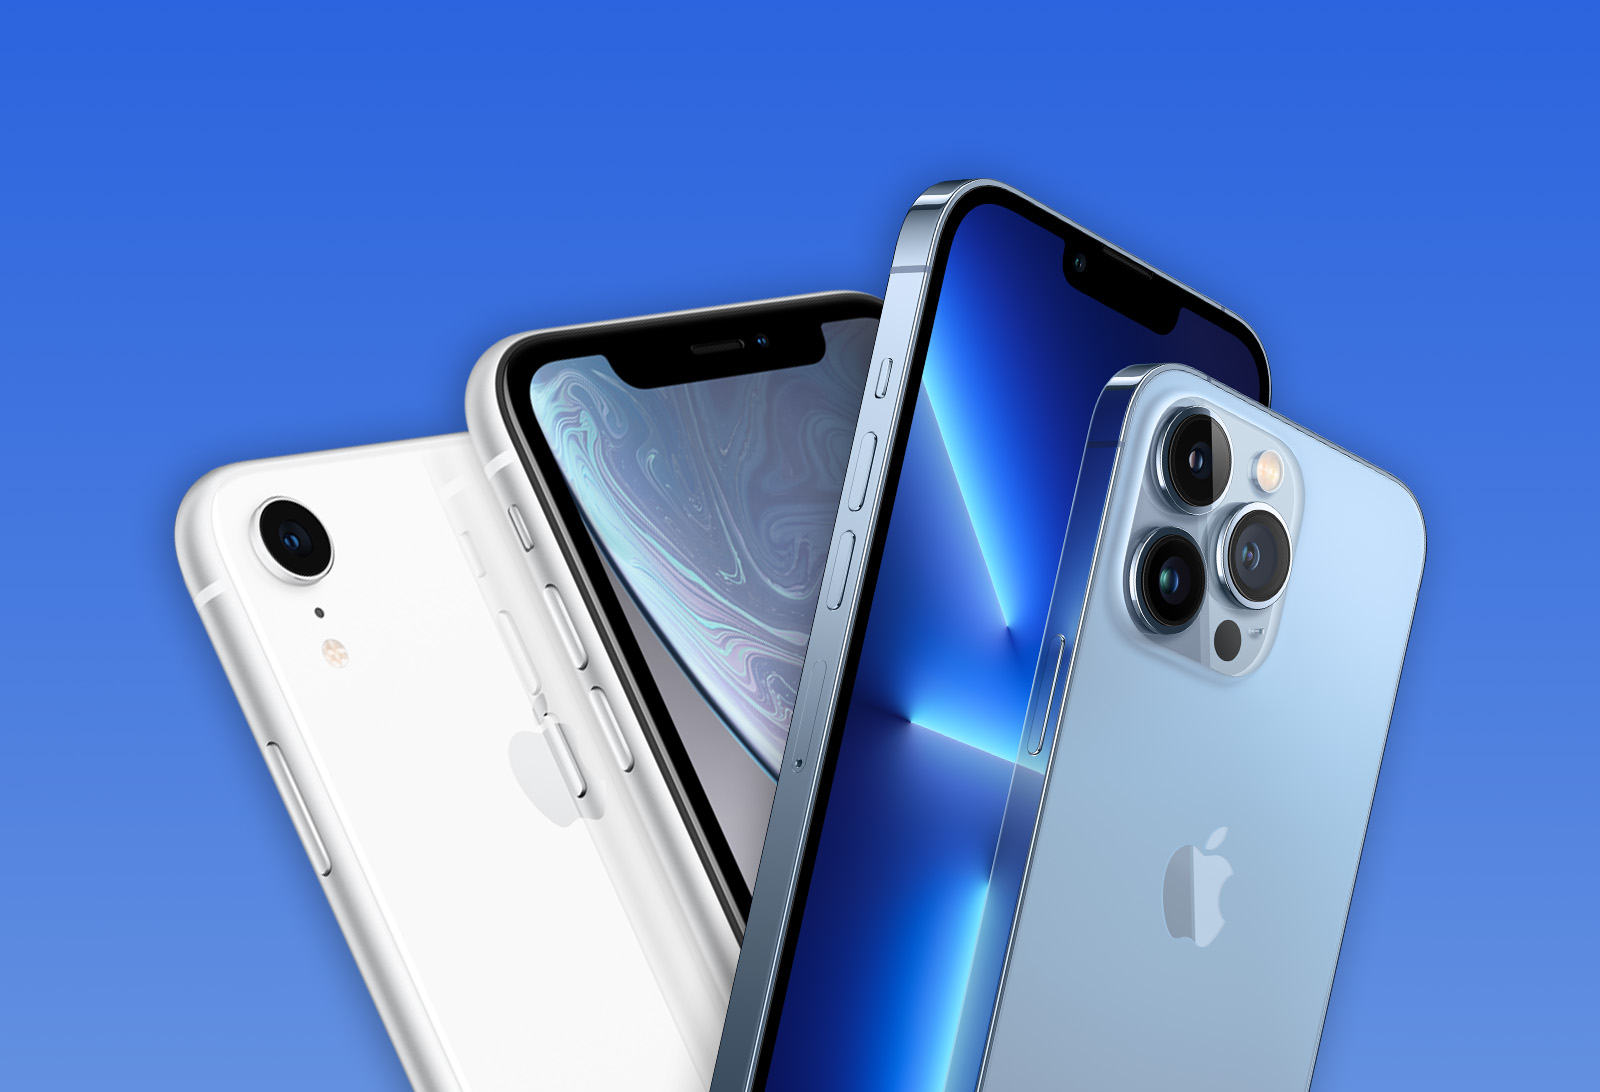 meet-the-newest-generation-of-the-iphone-family-iphone-xs-iphone-xs-max-iphone-xr